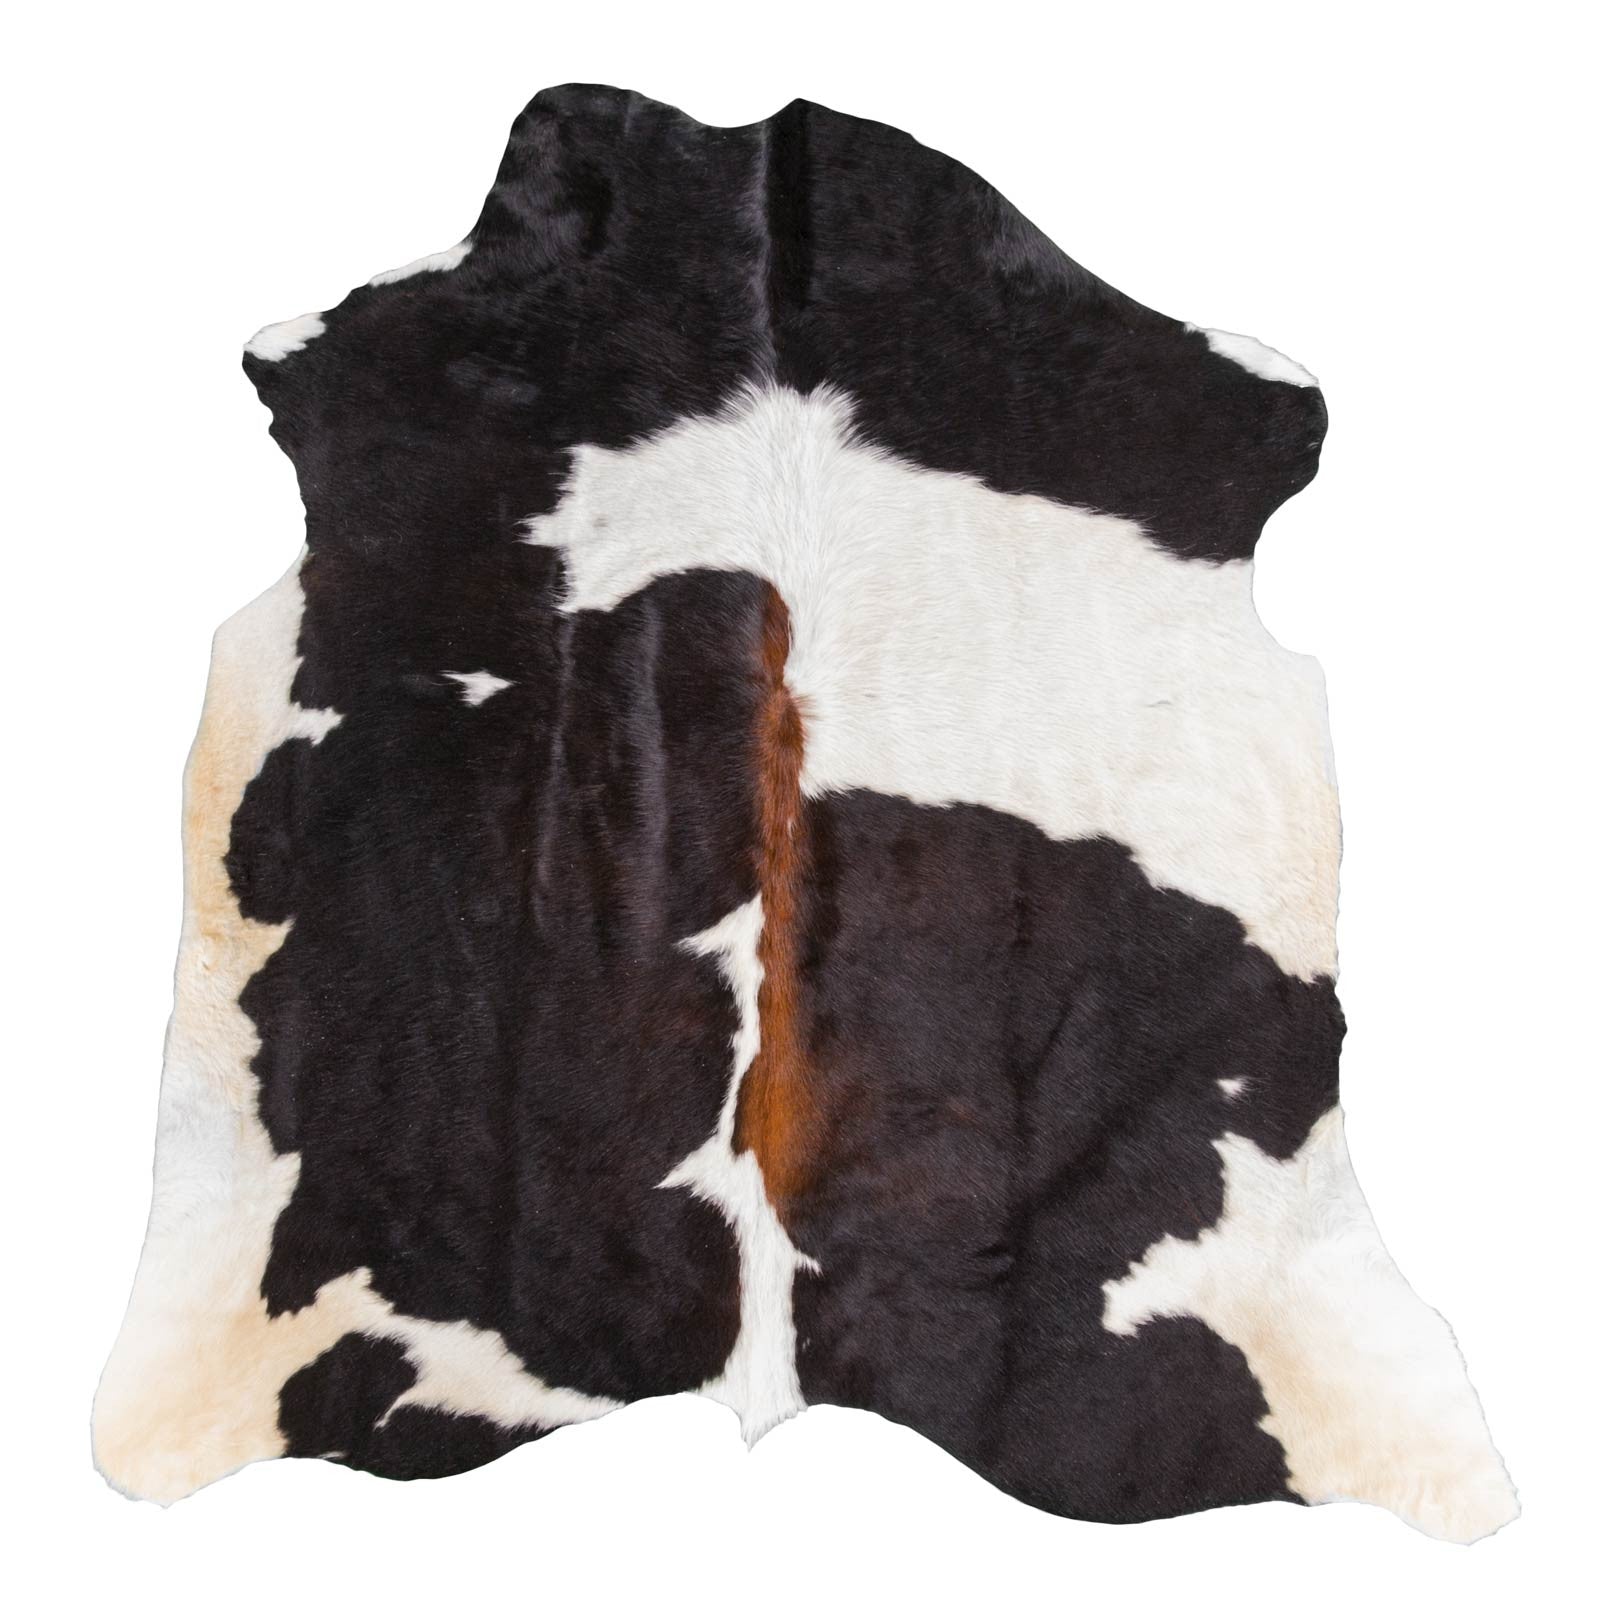 Black & White with Brown Shade Line Cowhide Rug - Rodeo Cowhide Rugs